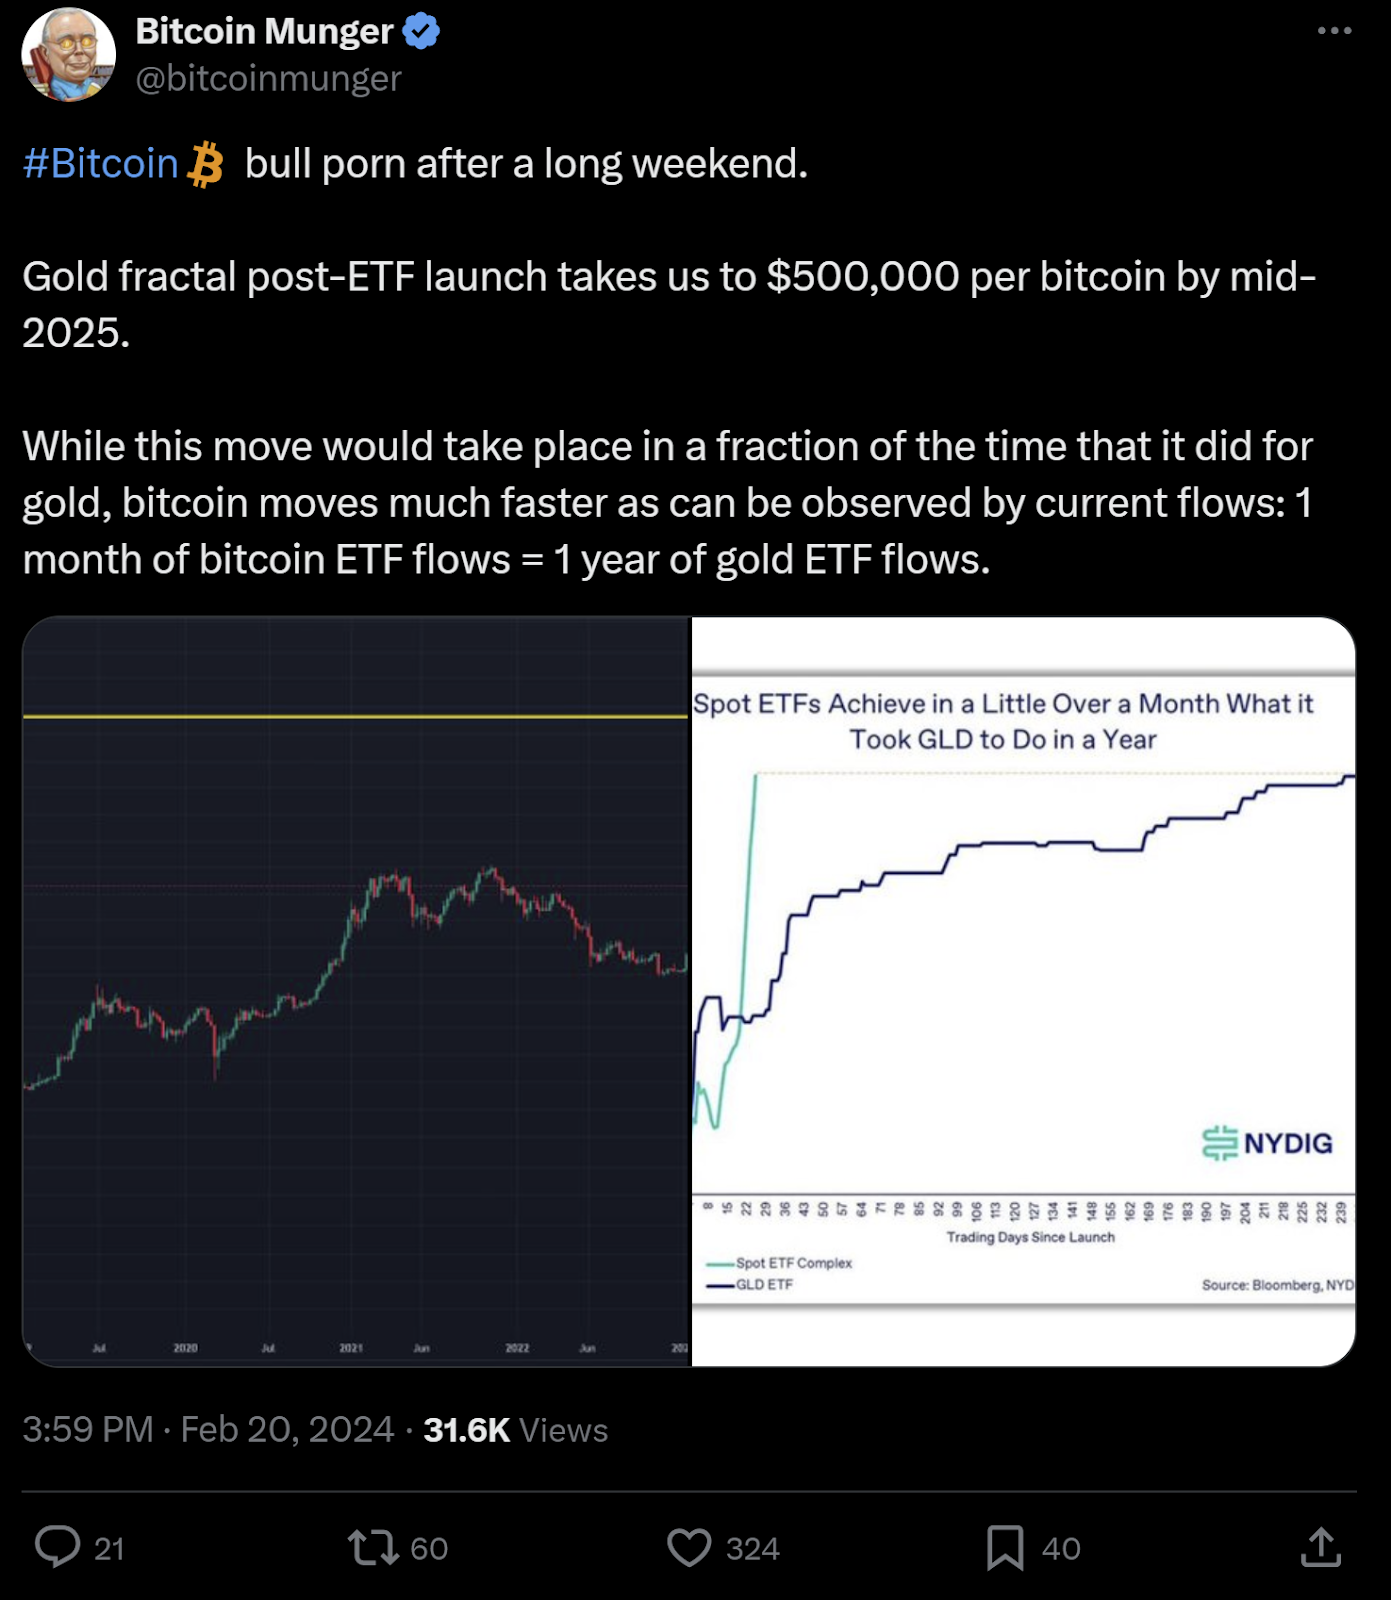 Bitcoin Munger's tweet highlights the rapid growth potential of Bitcoin, comparing ETF inflows to those of gold.